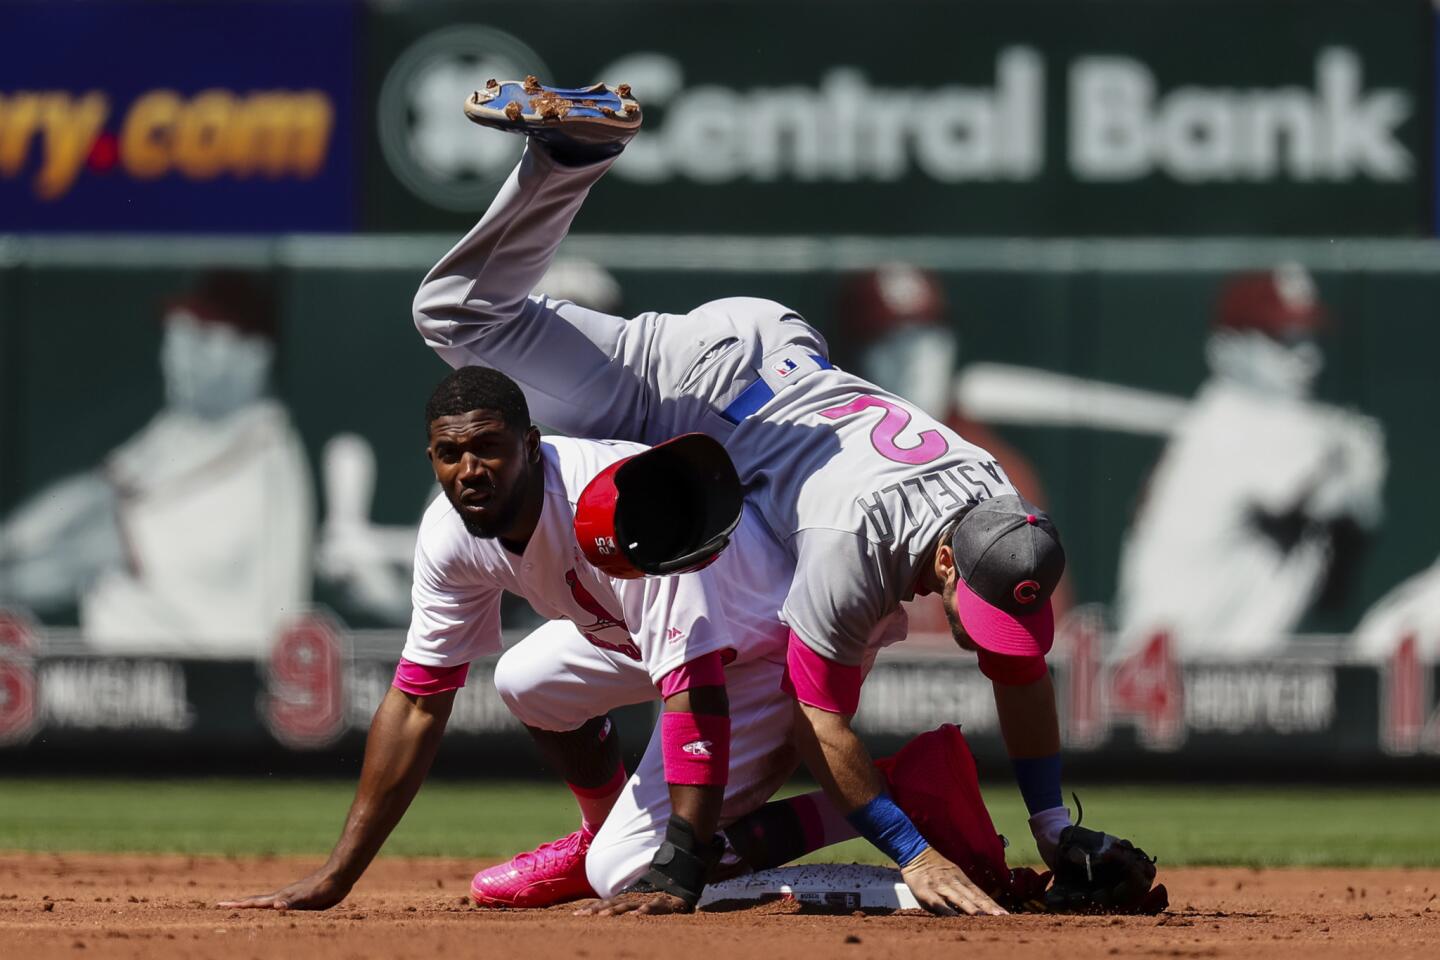 The Cardinals' Dexter Fowler, bottom, takes out the Cubs' Tommy La Stella, top, after he turns a double play during the first inning Saturday, May 13, 2017, in St. Louis.